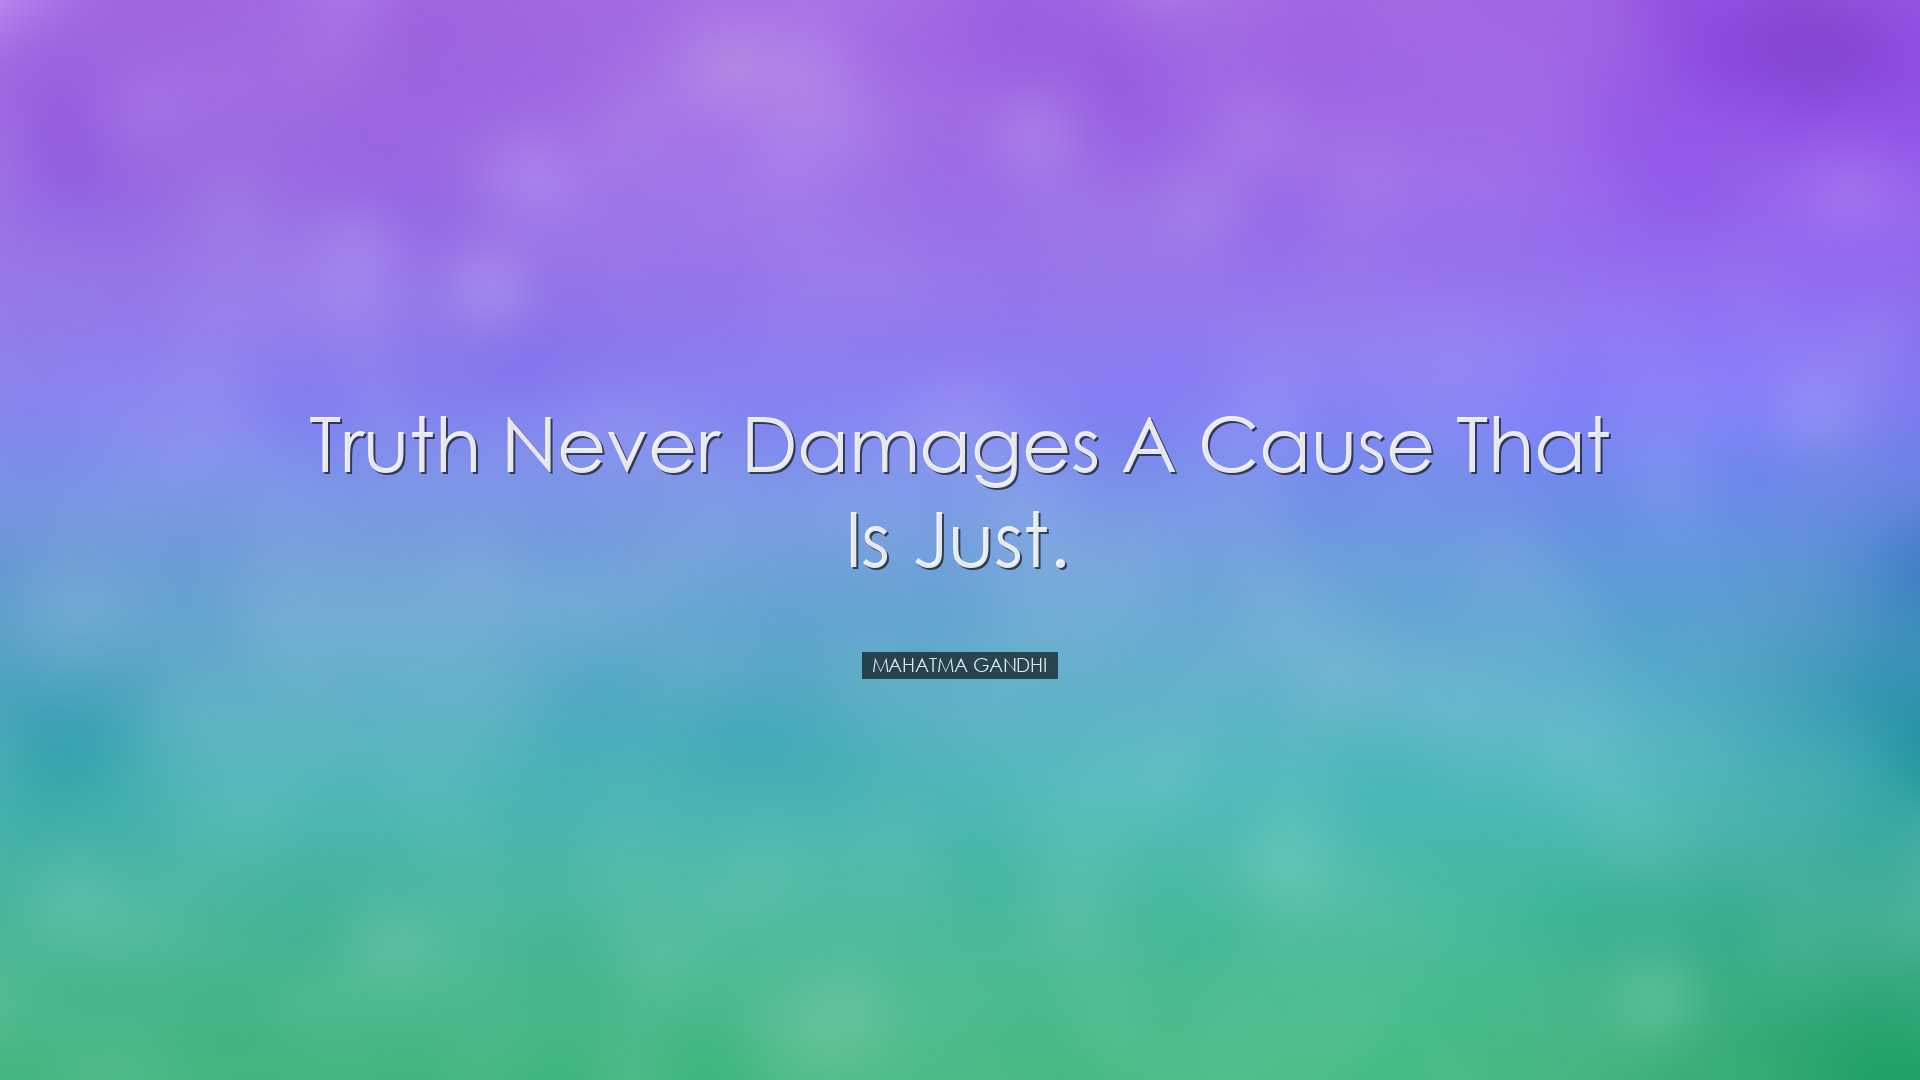 Truth never damages a cause that is just. - Mahatma Gandhi